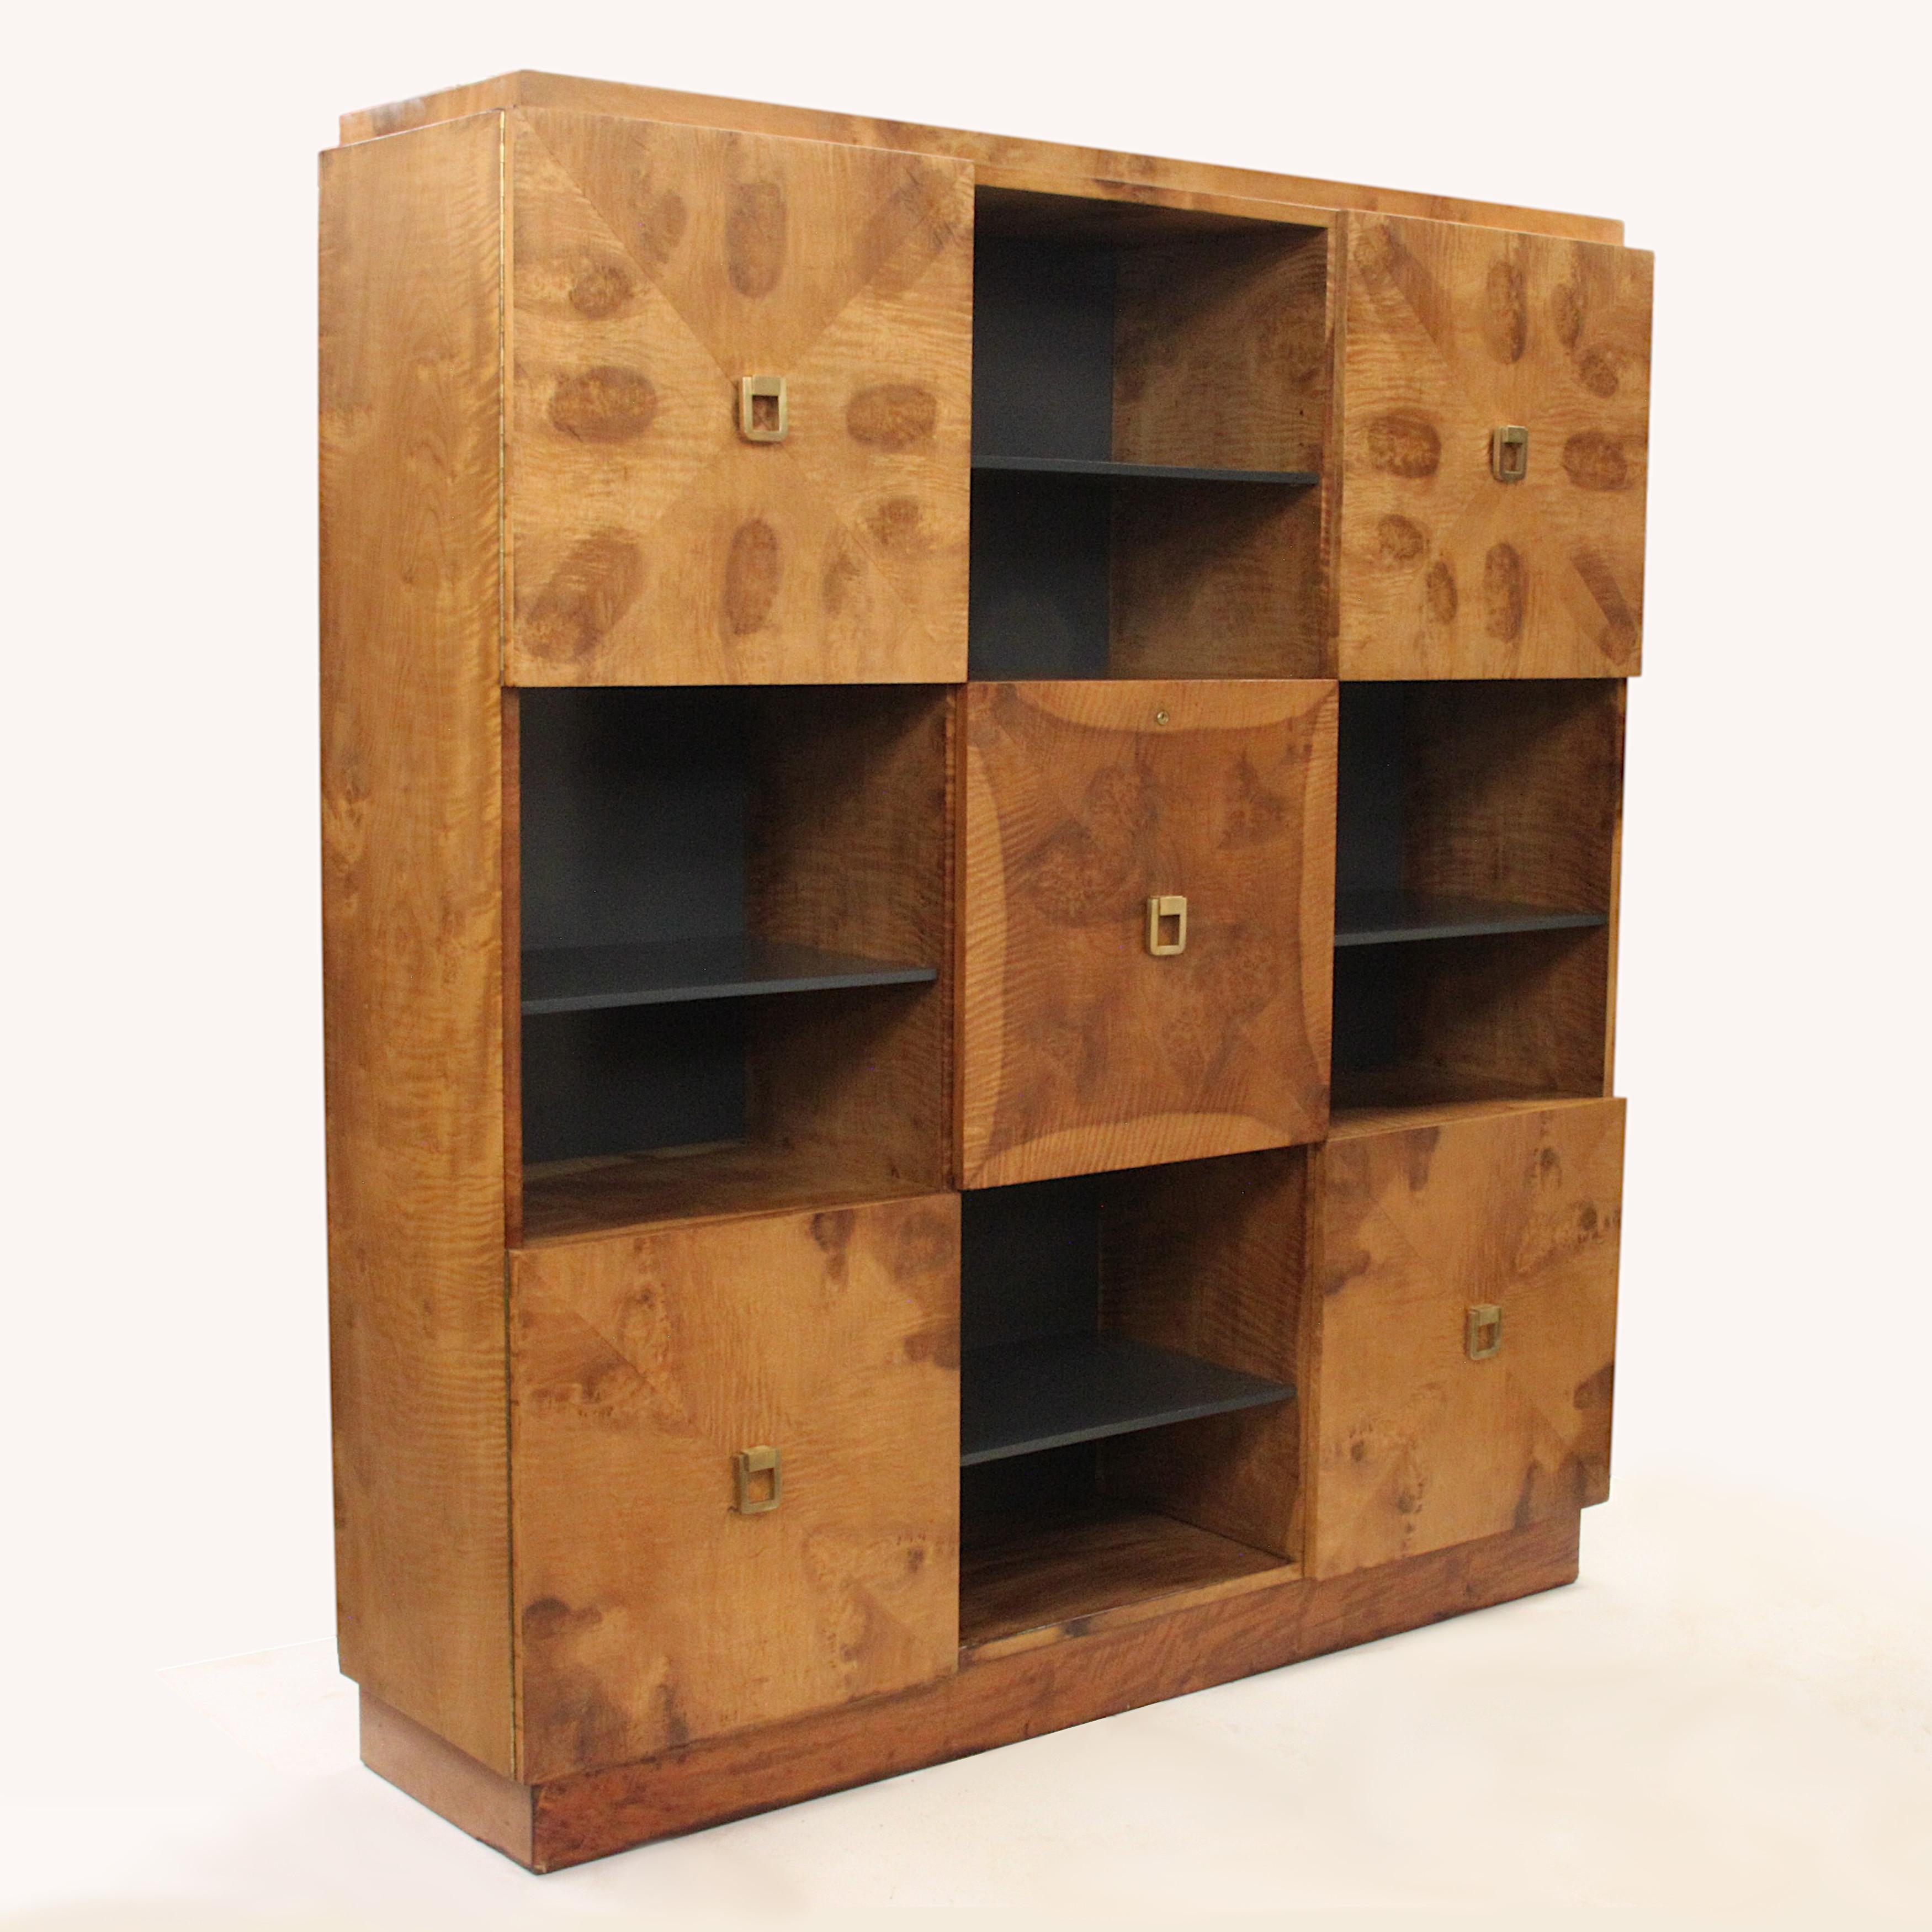 Spectacular burled cabinet/wall unit designed by Johan Tapp for Gumps. 
Cabinet features beautiful book-matched burl veneered doors, solid brass hardware and unique, center fold-down desk/cubby. A striking Mid Century piece with equal amounts of